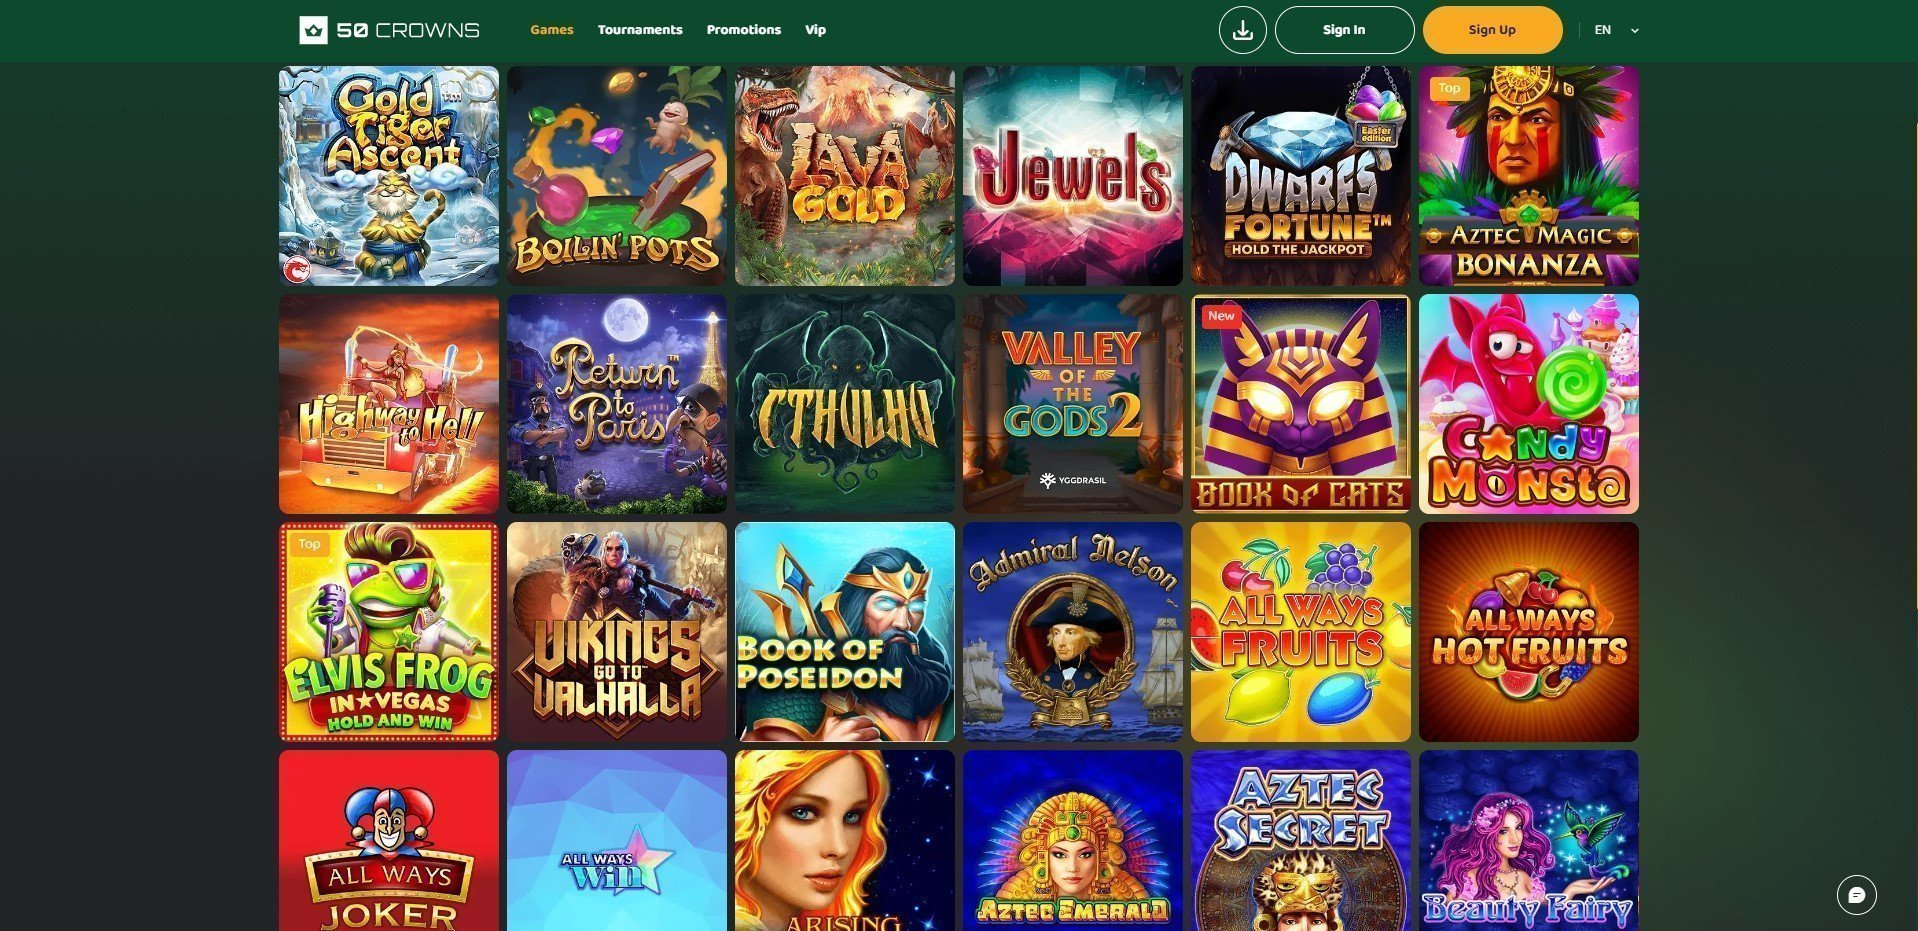 50 Crowns Casino Games